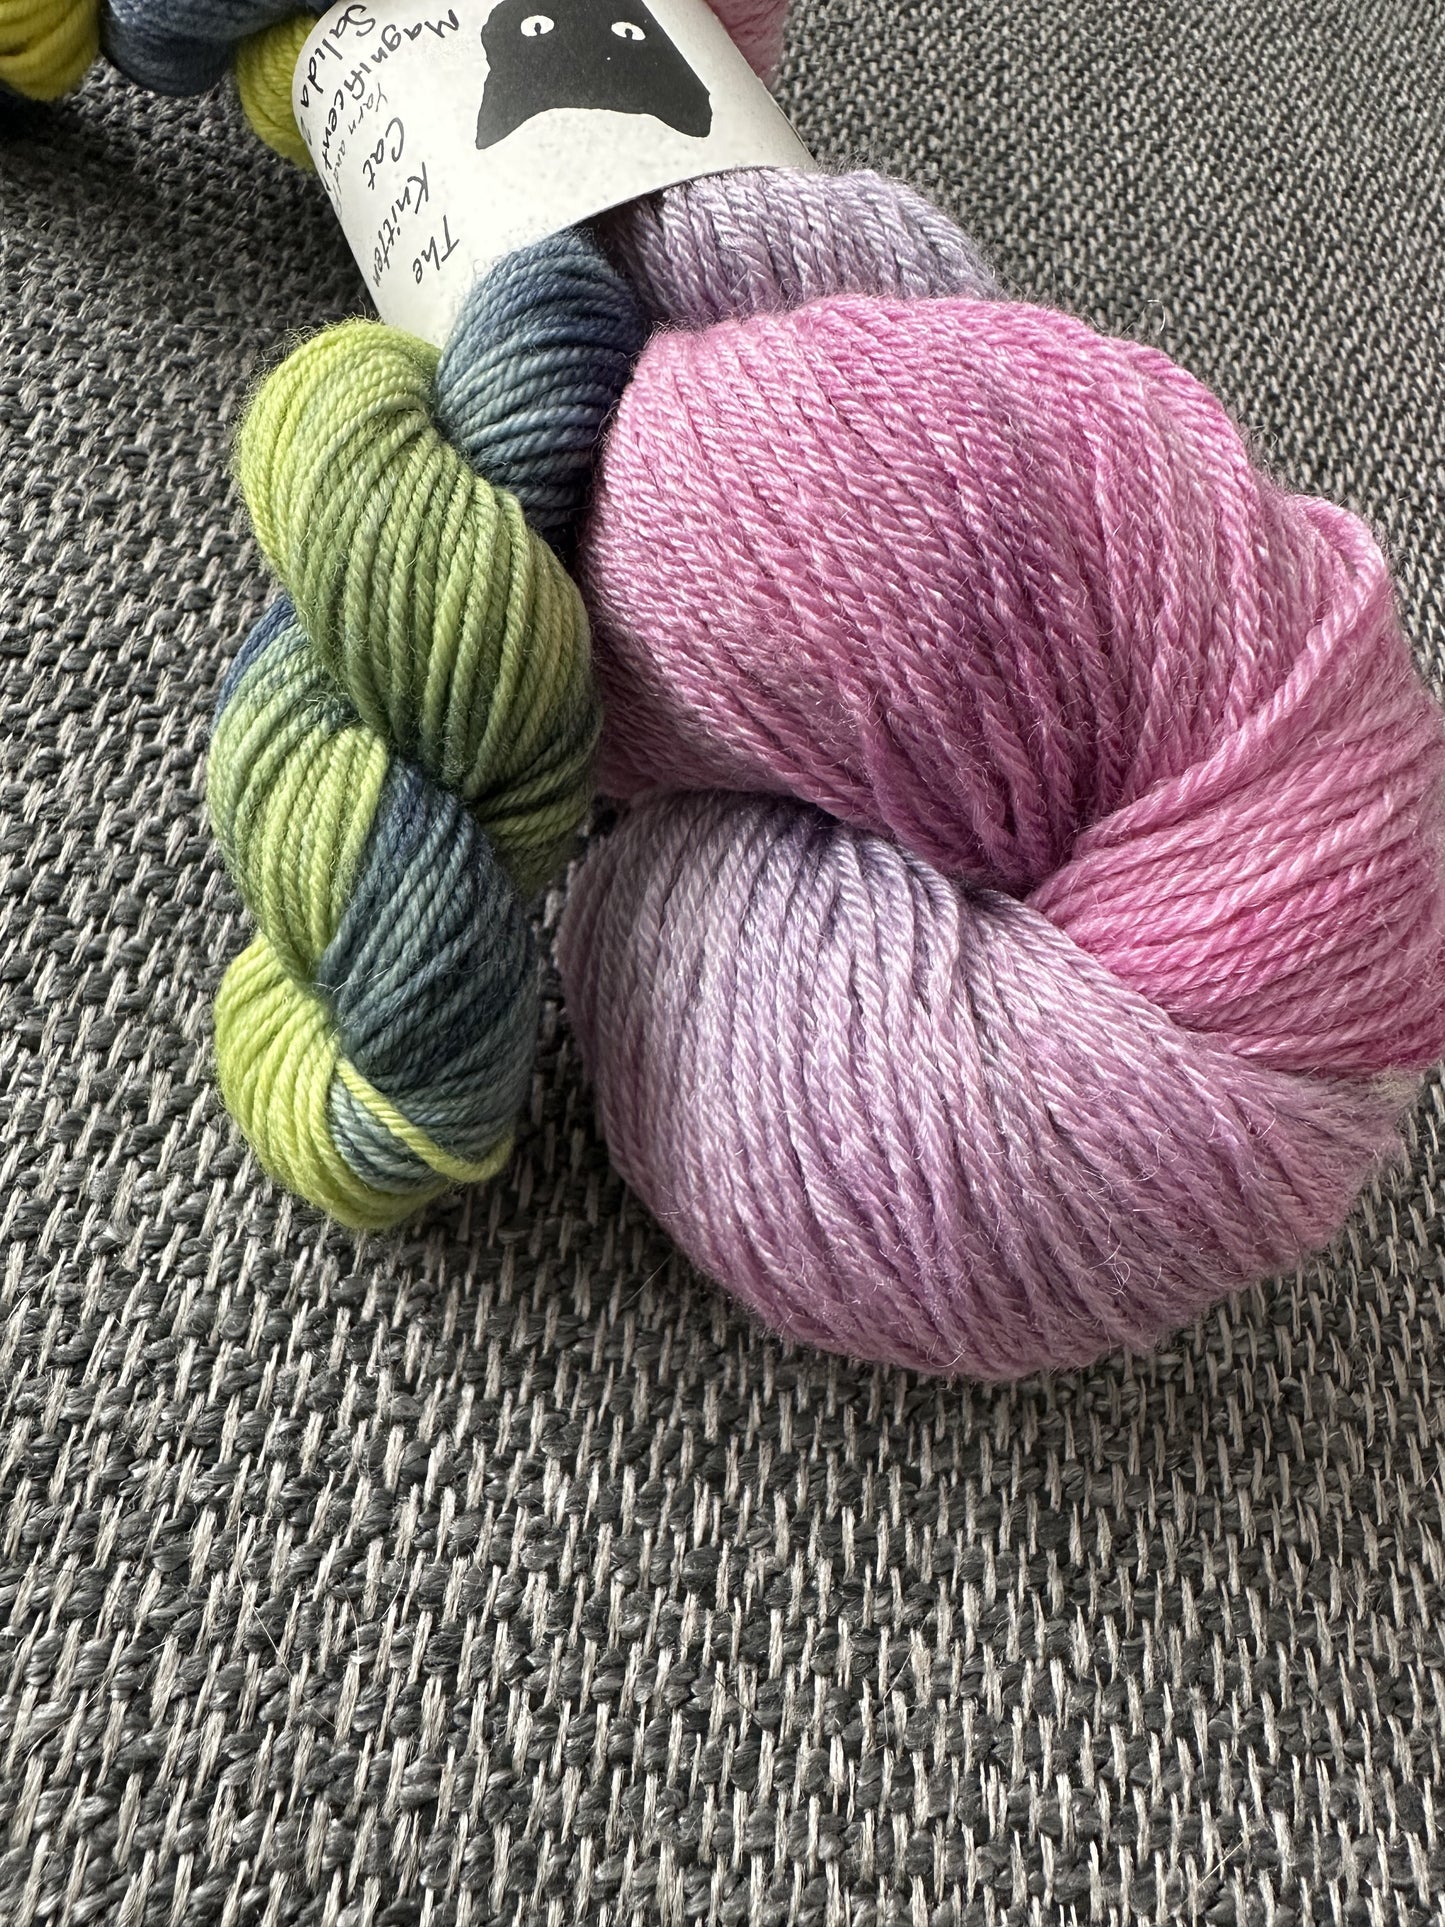 Hand Dyed - Magnificent Mountains Salida 2023